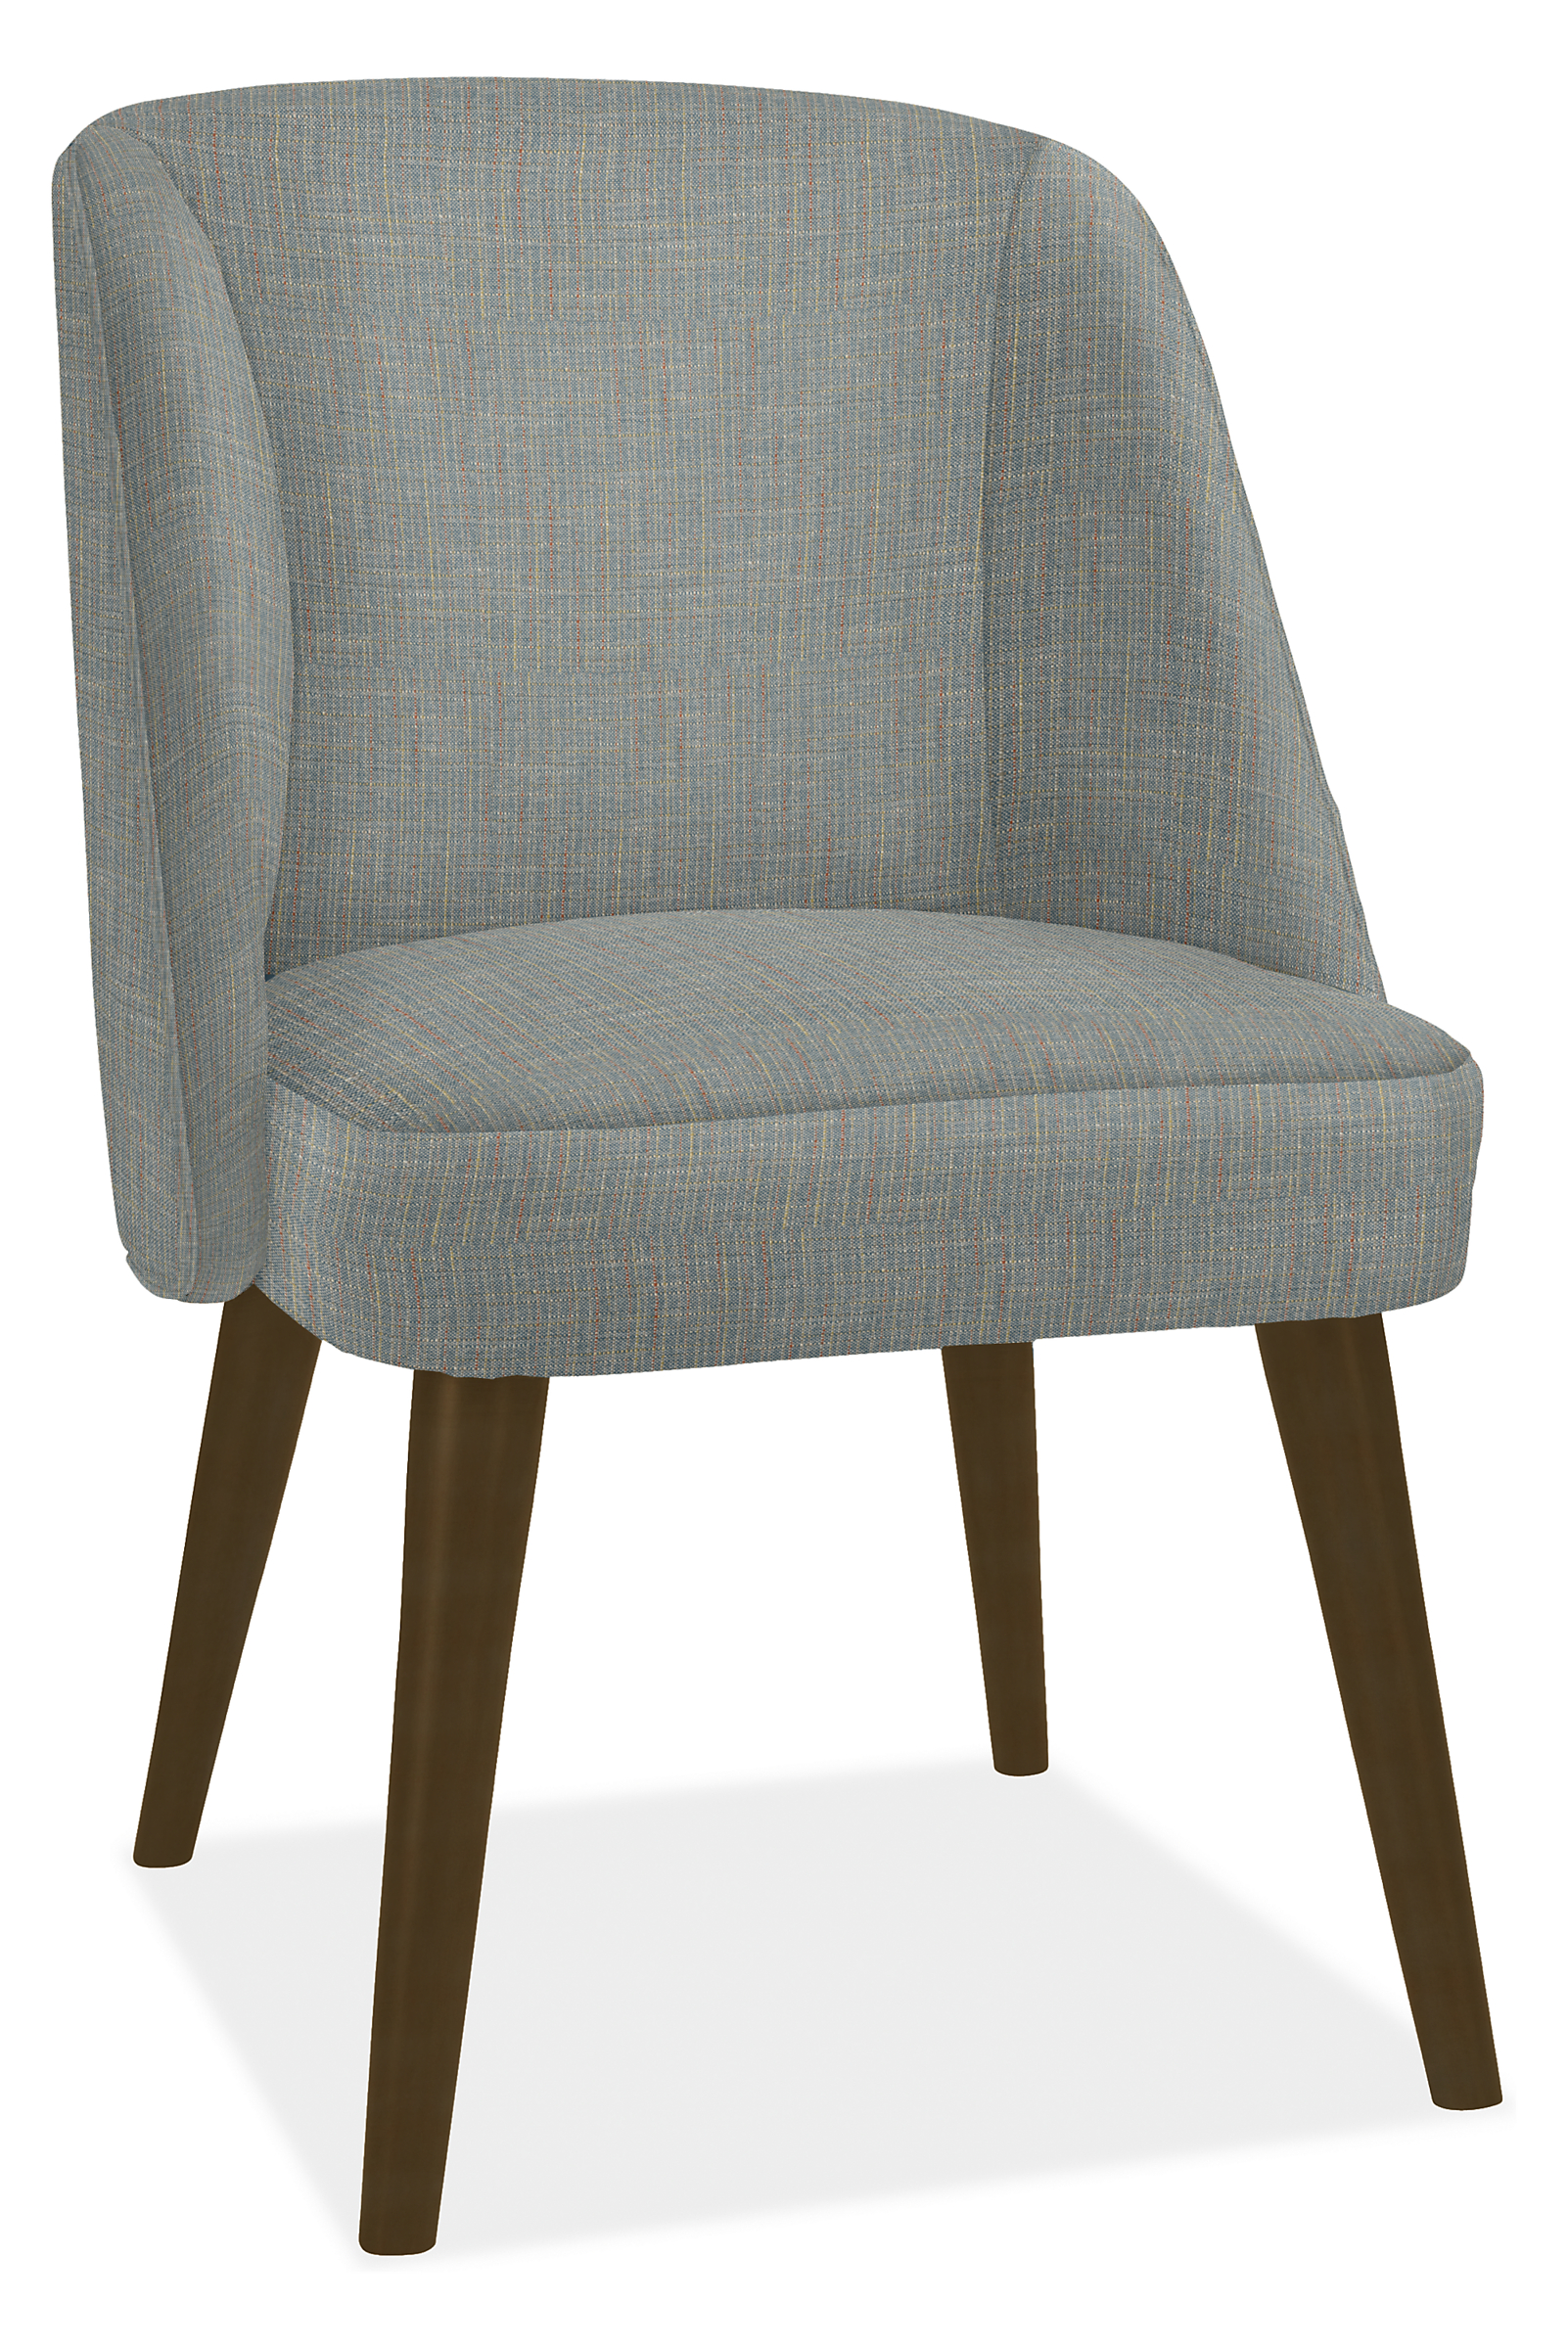 Cora Side Chair in Harrow Slate with Charcoal Legs